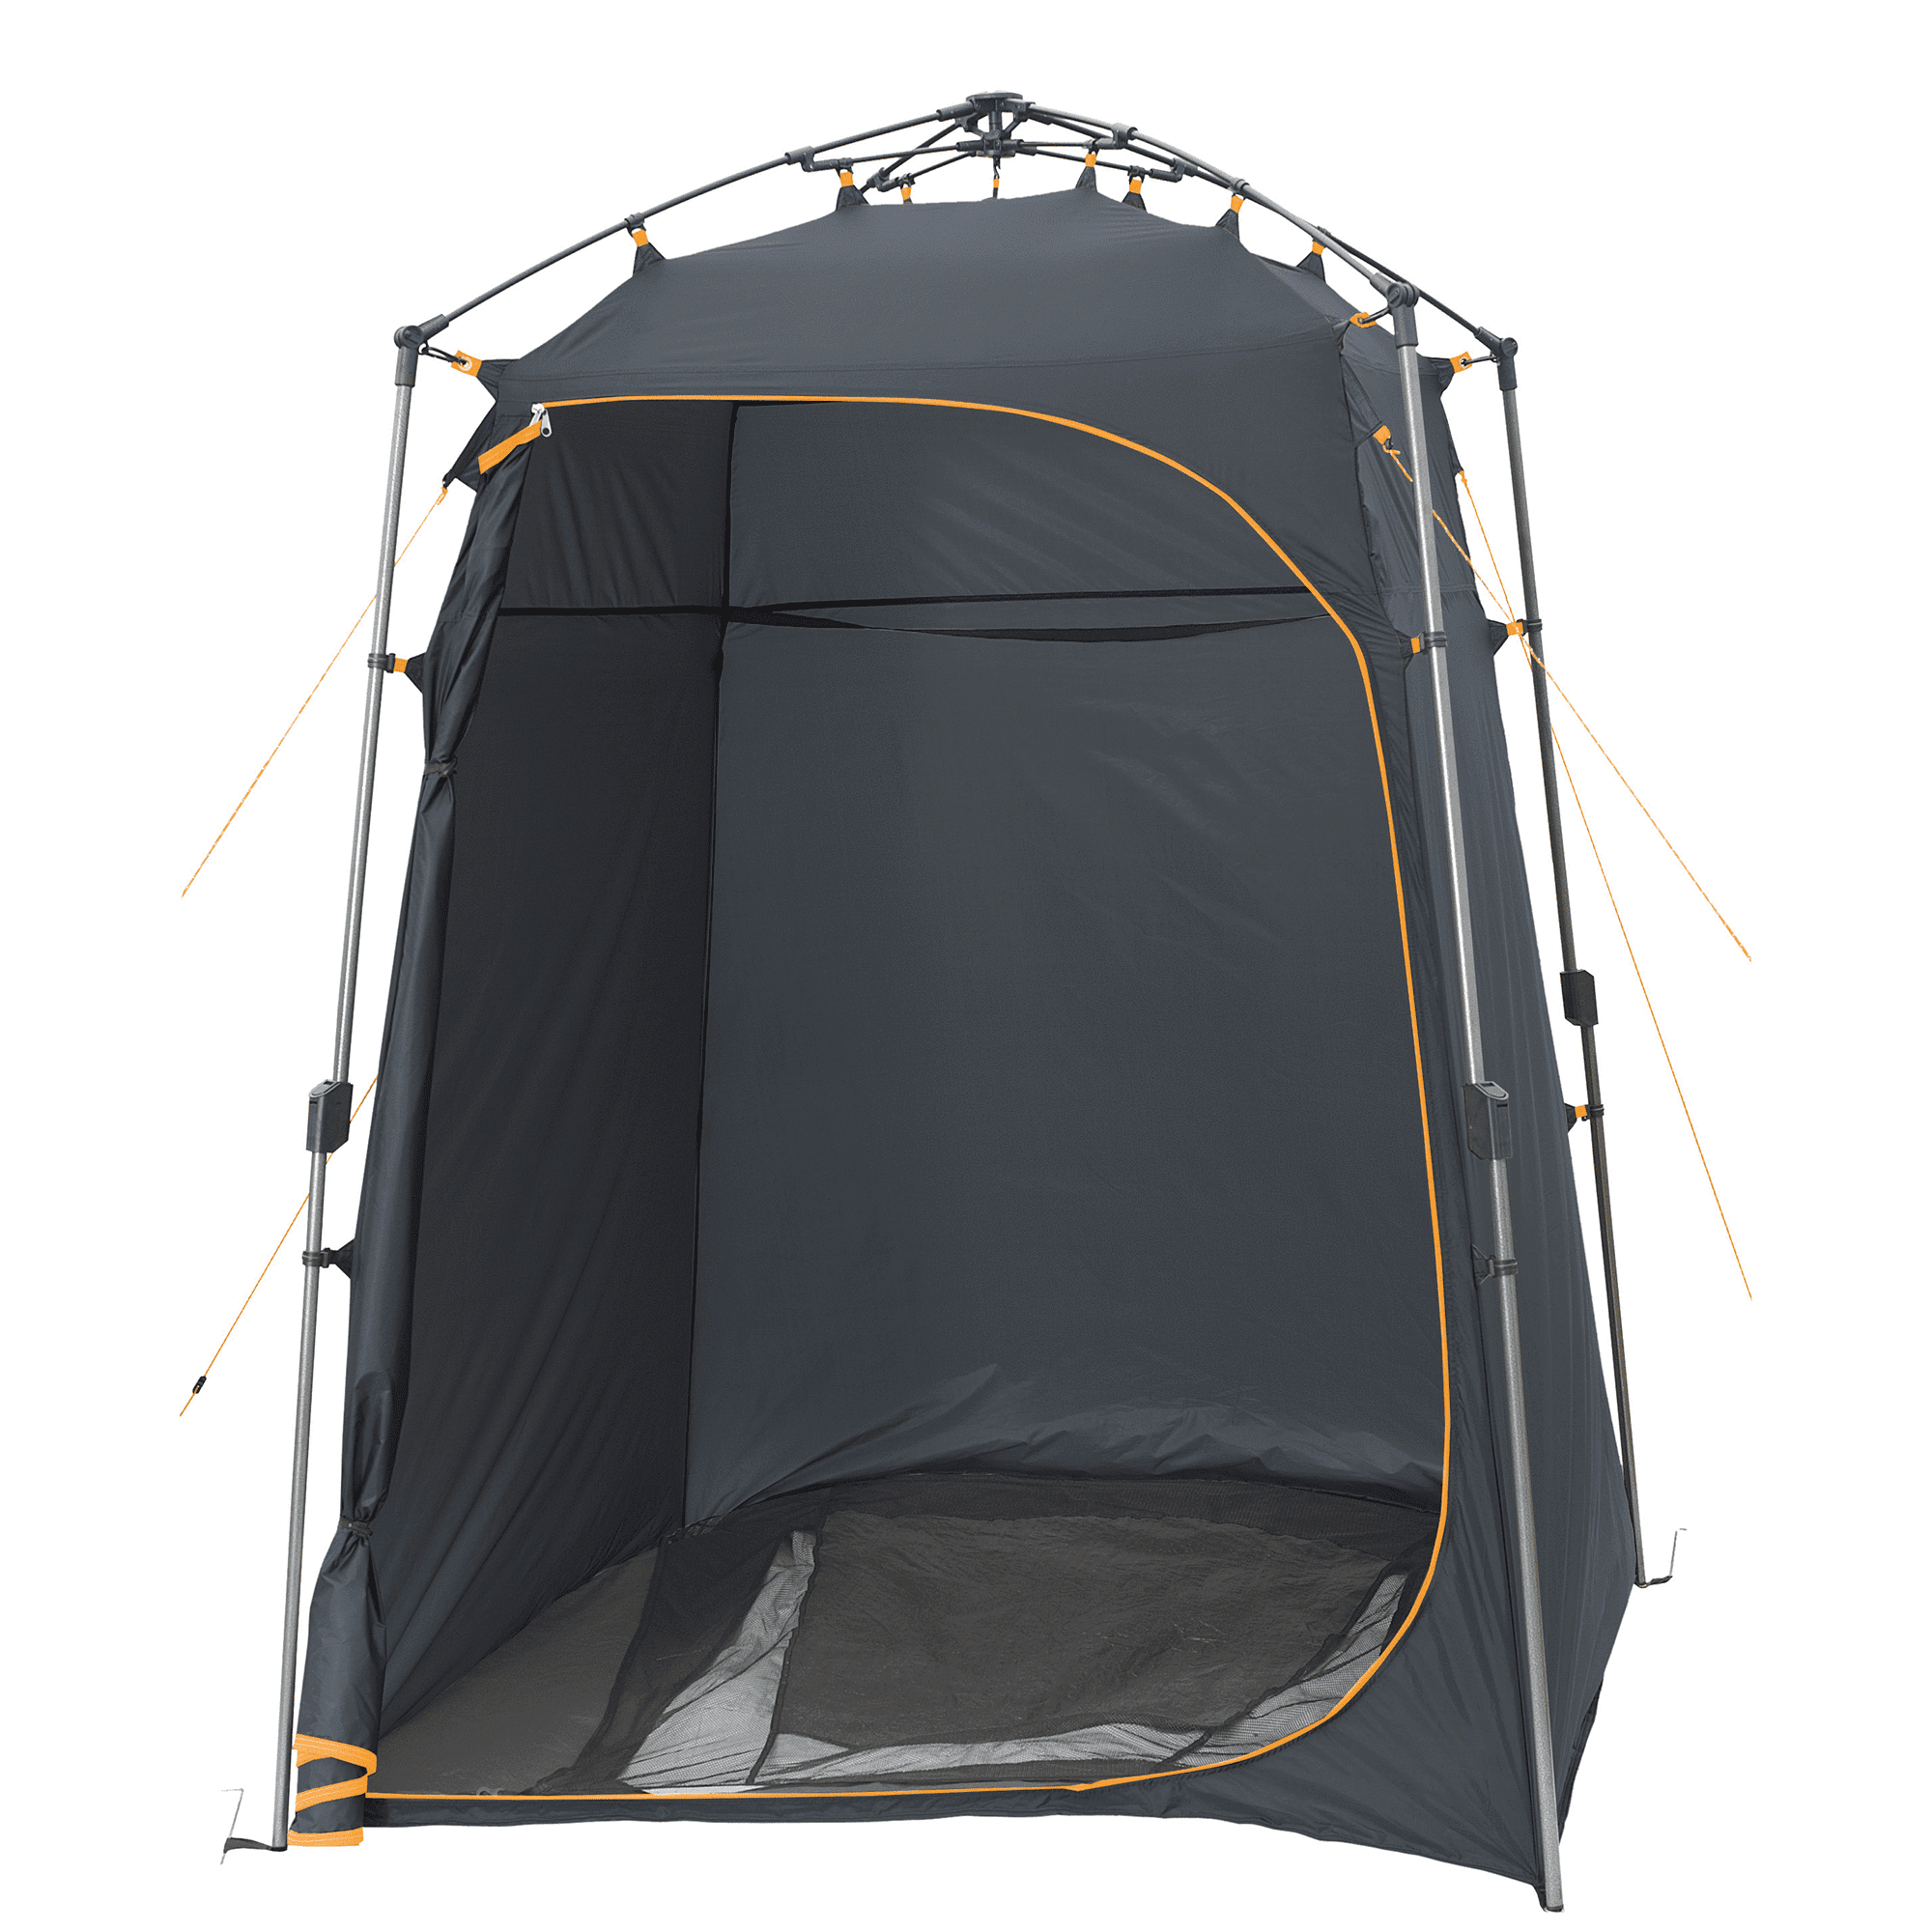 Hiking Privacy Changing Room Outdoor Tent Camping Shower Instant Pop Up 